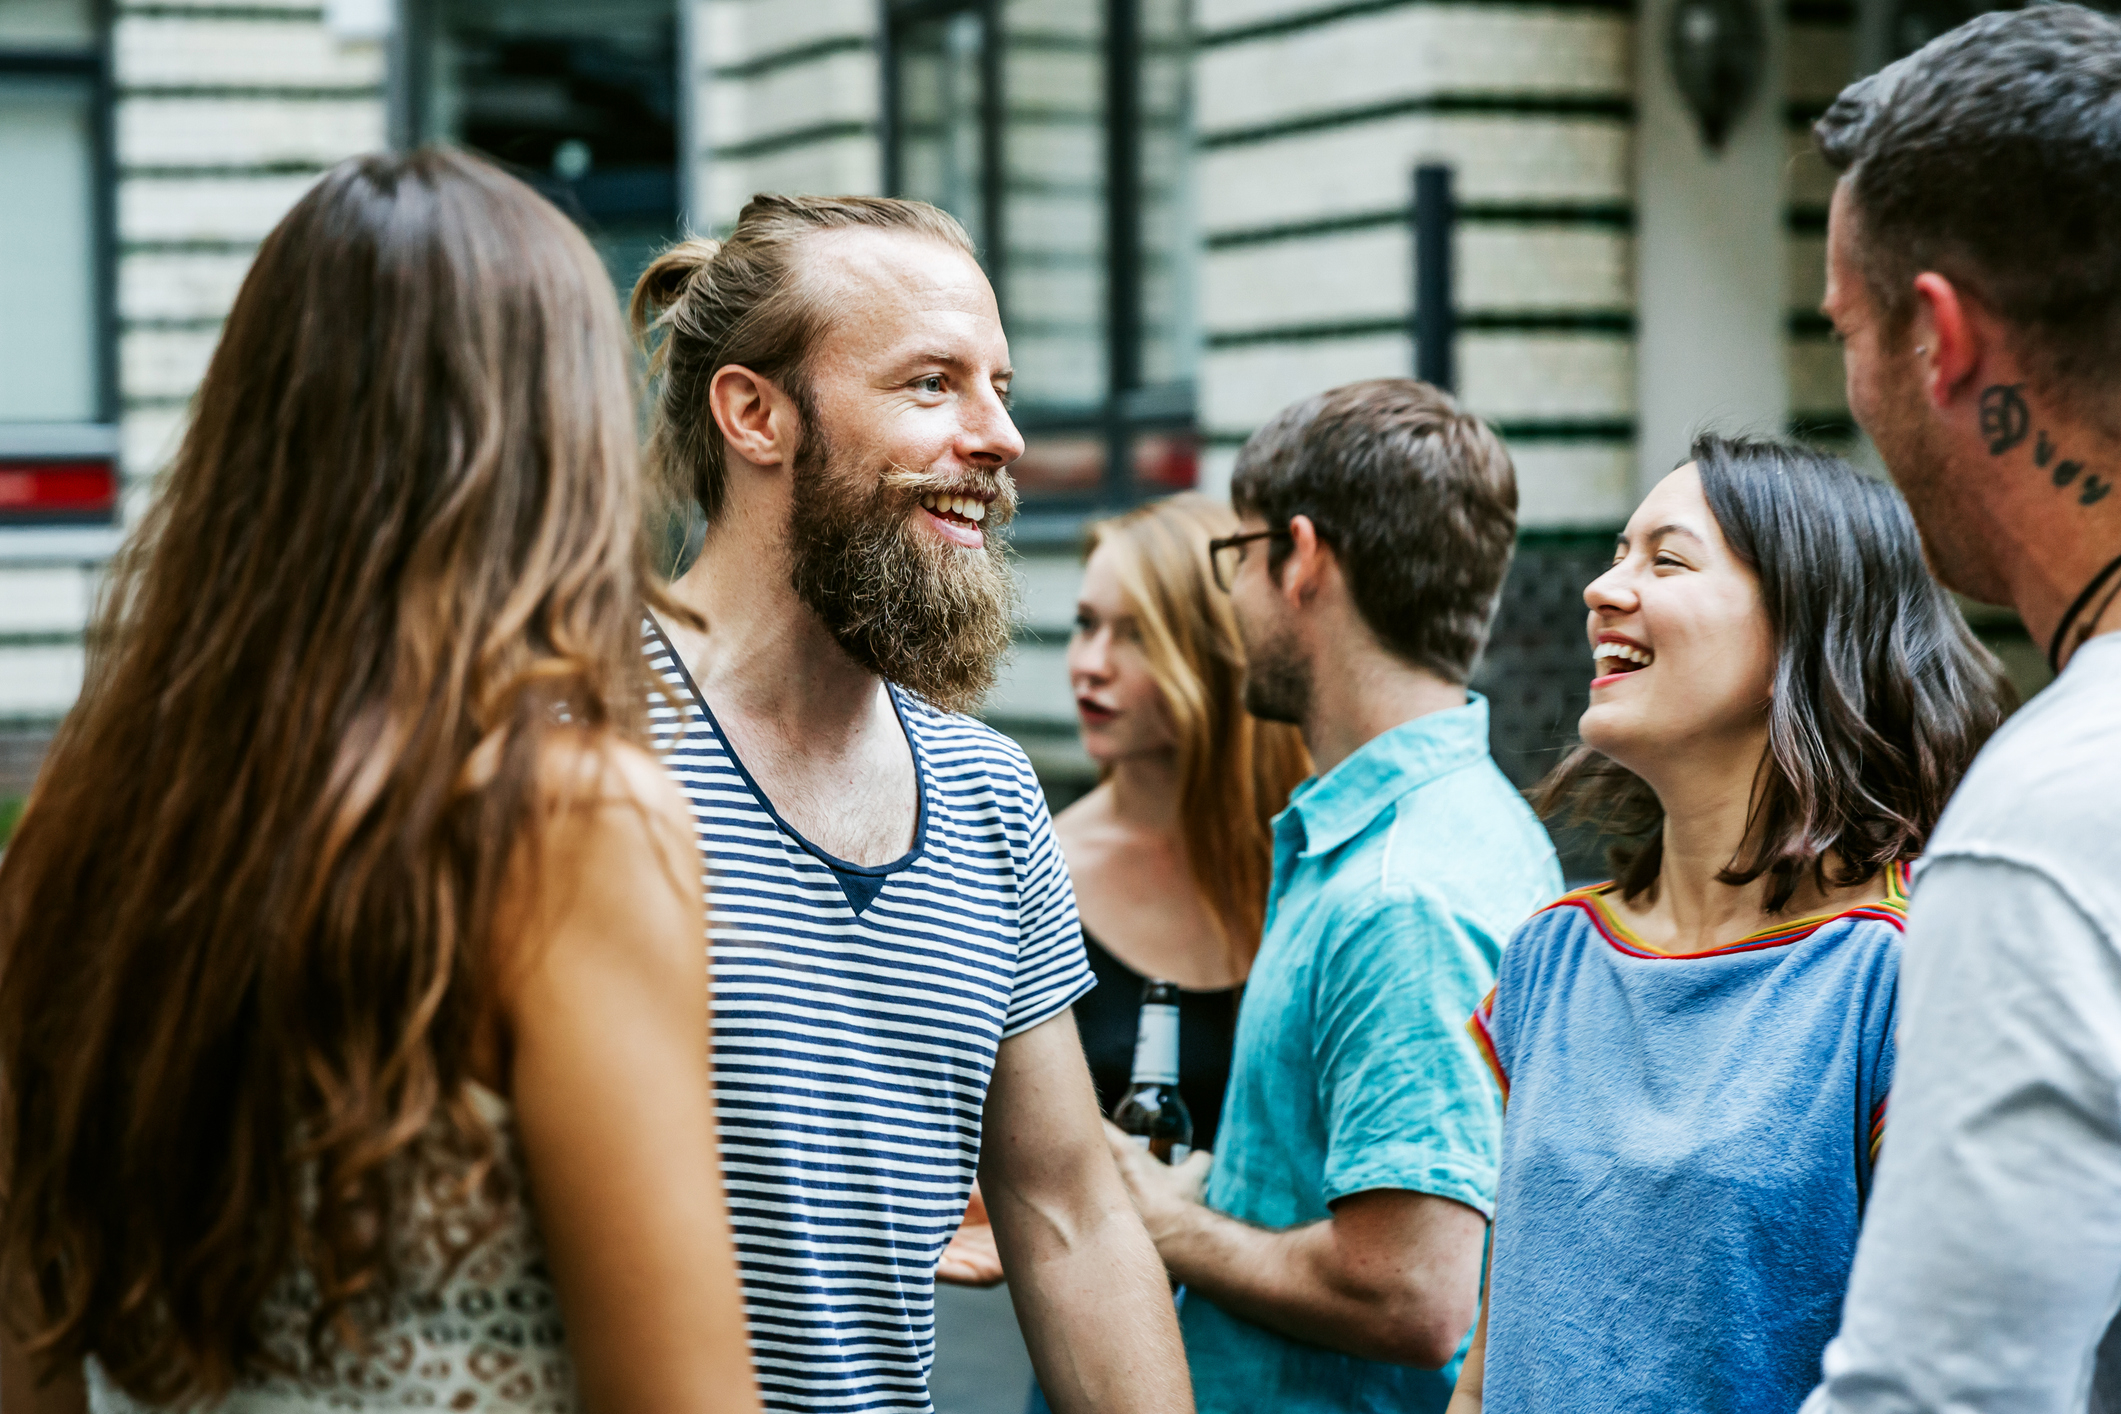 Group of people engaging in conversation at a social event, smiling and expressing positive body language